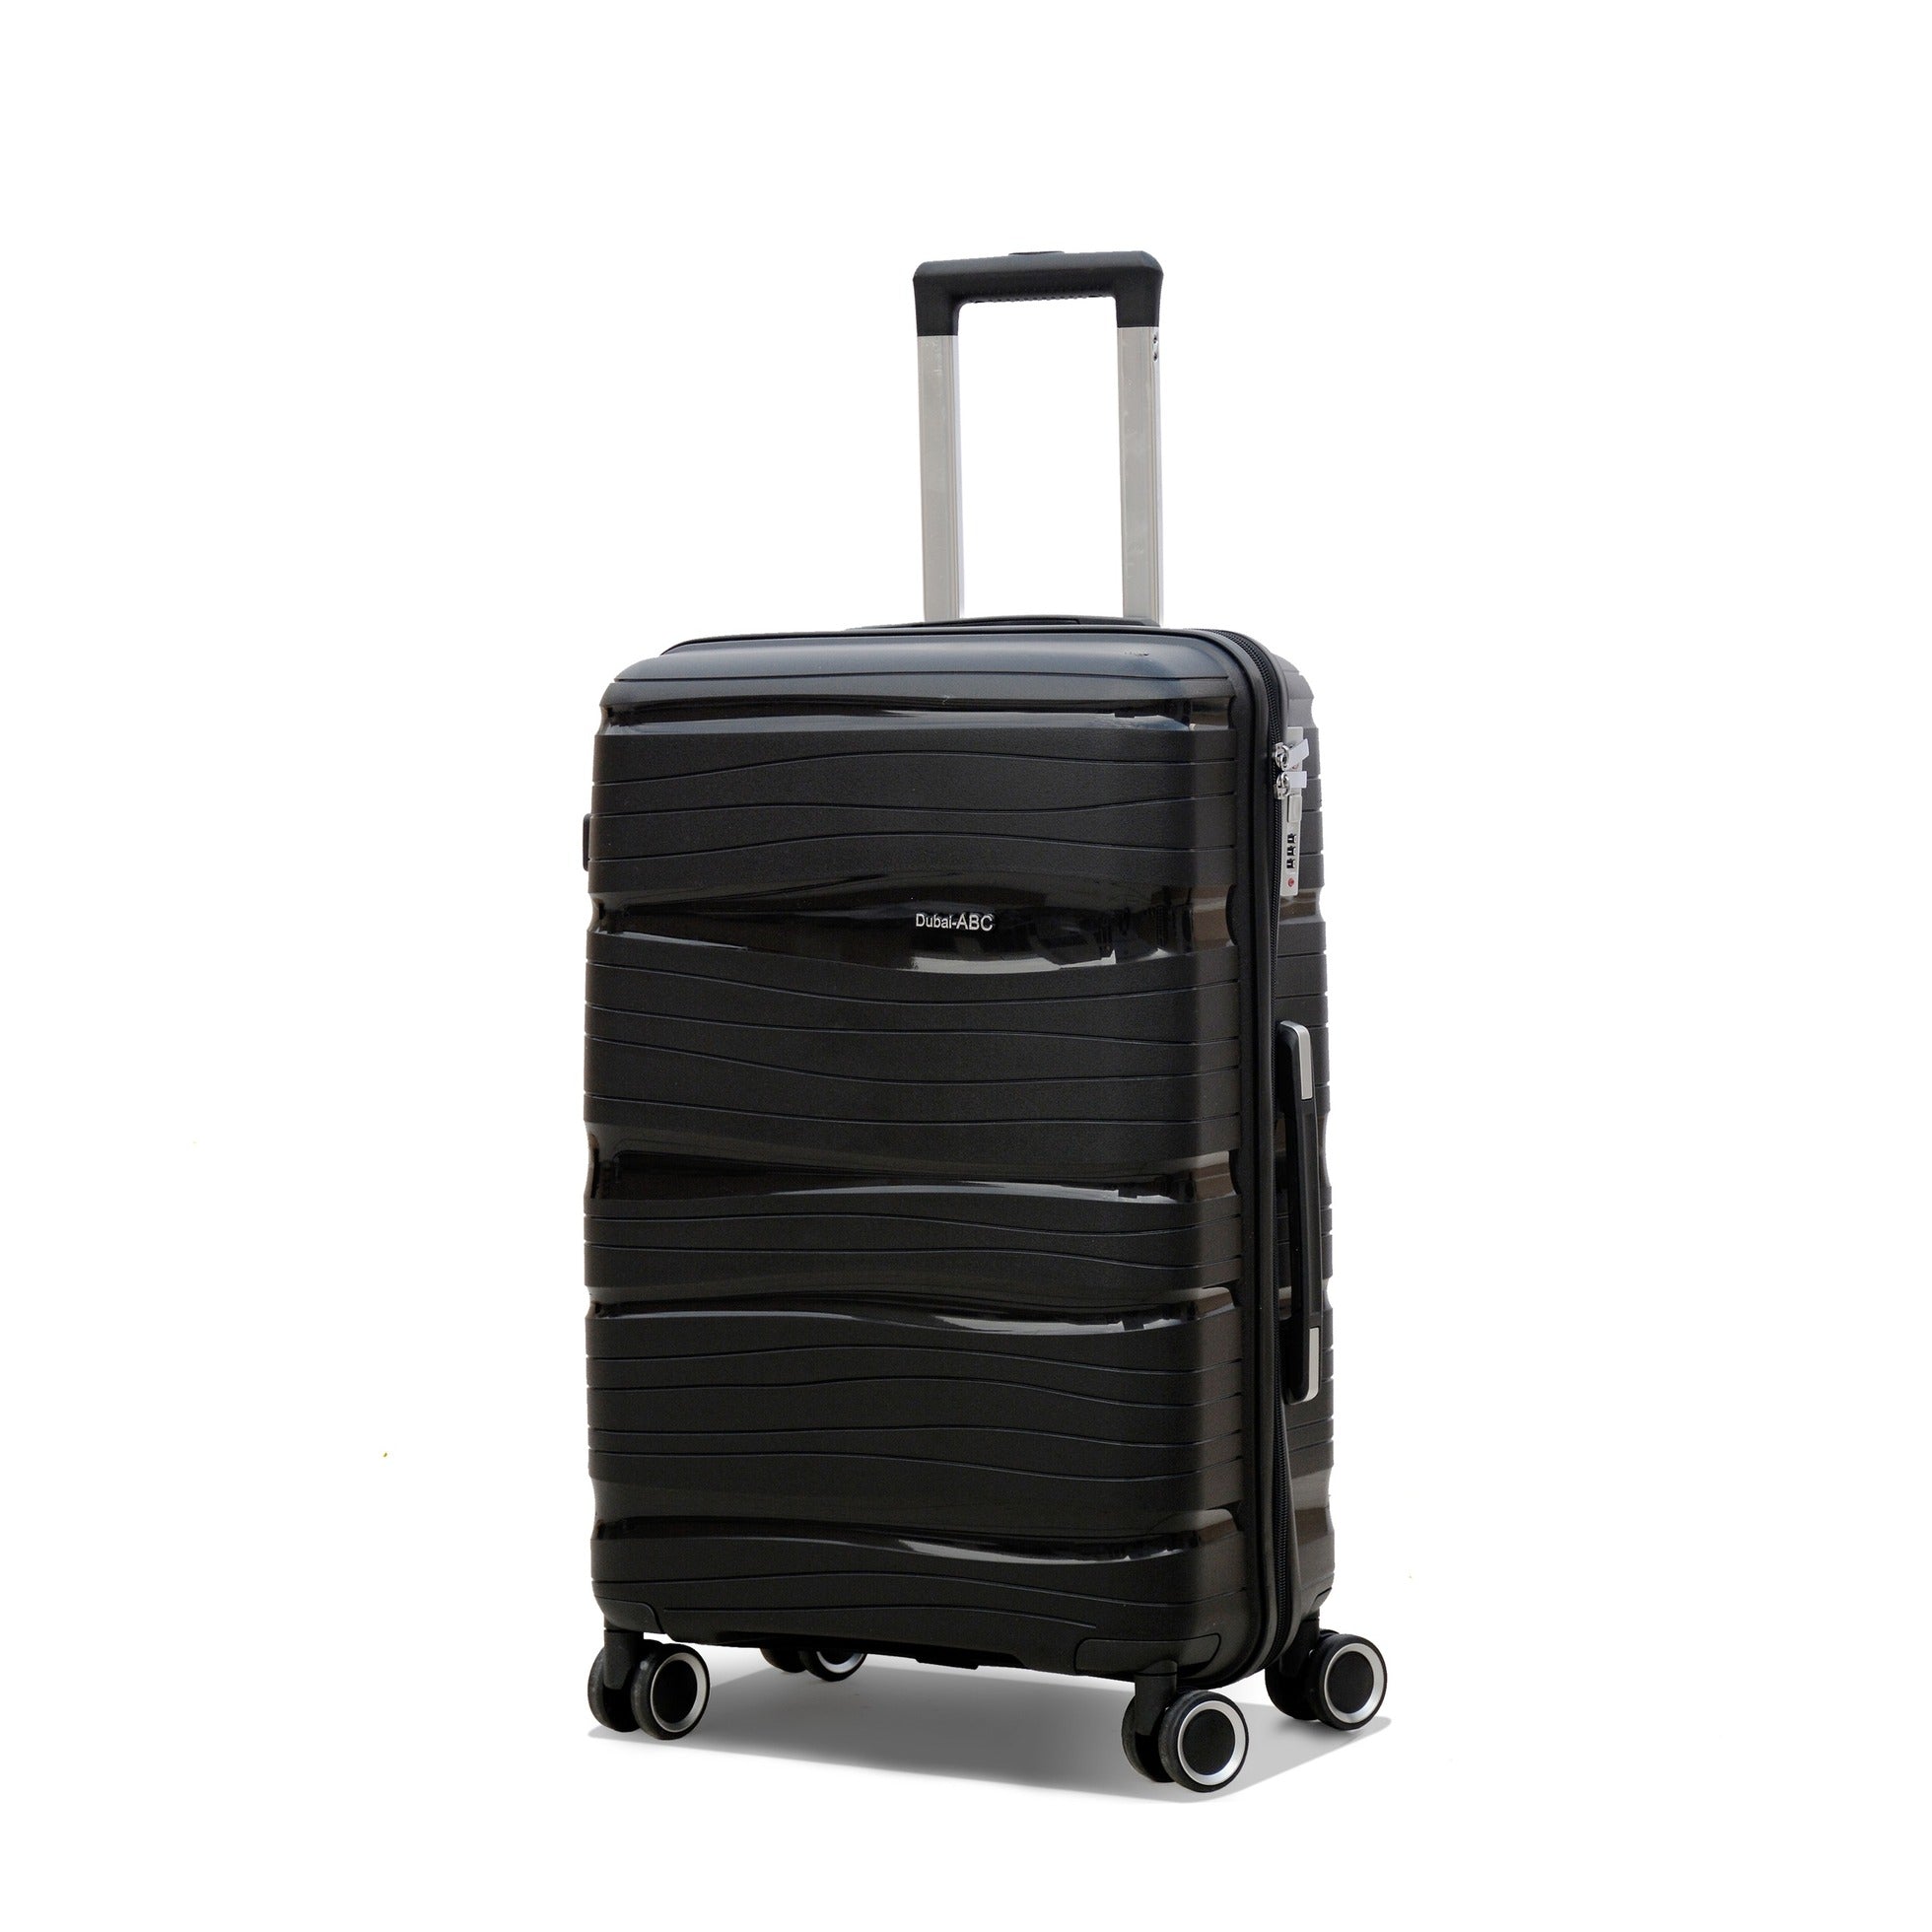 28" Black Colour Royal PP Luggage Lightweight Hard Case Trolley Bag With Double Spinner Wheel